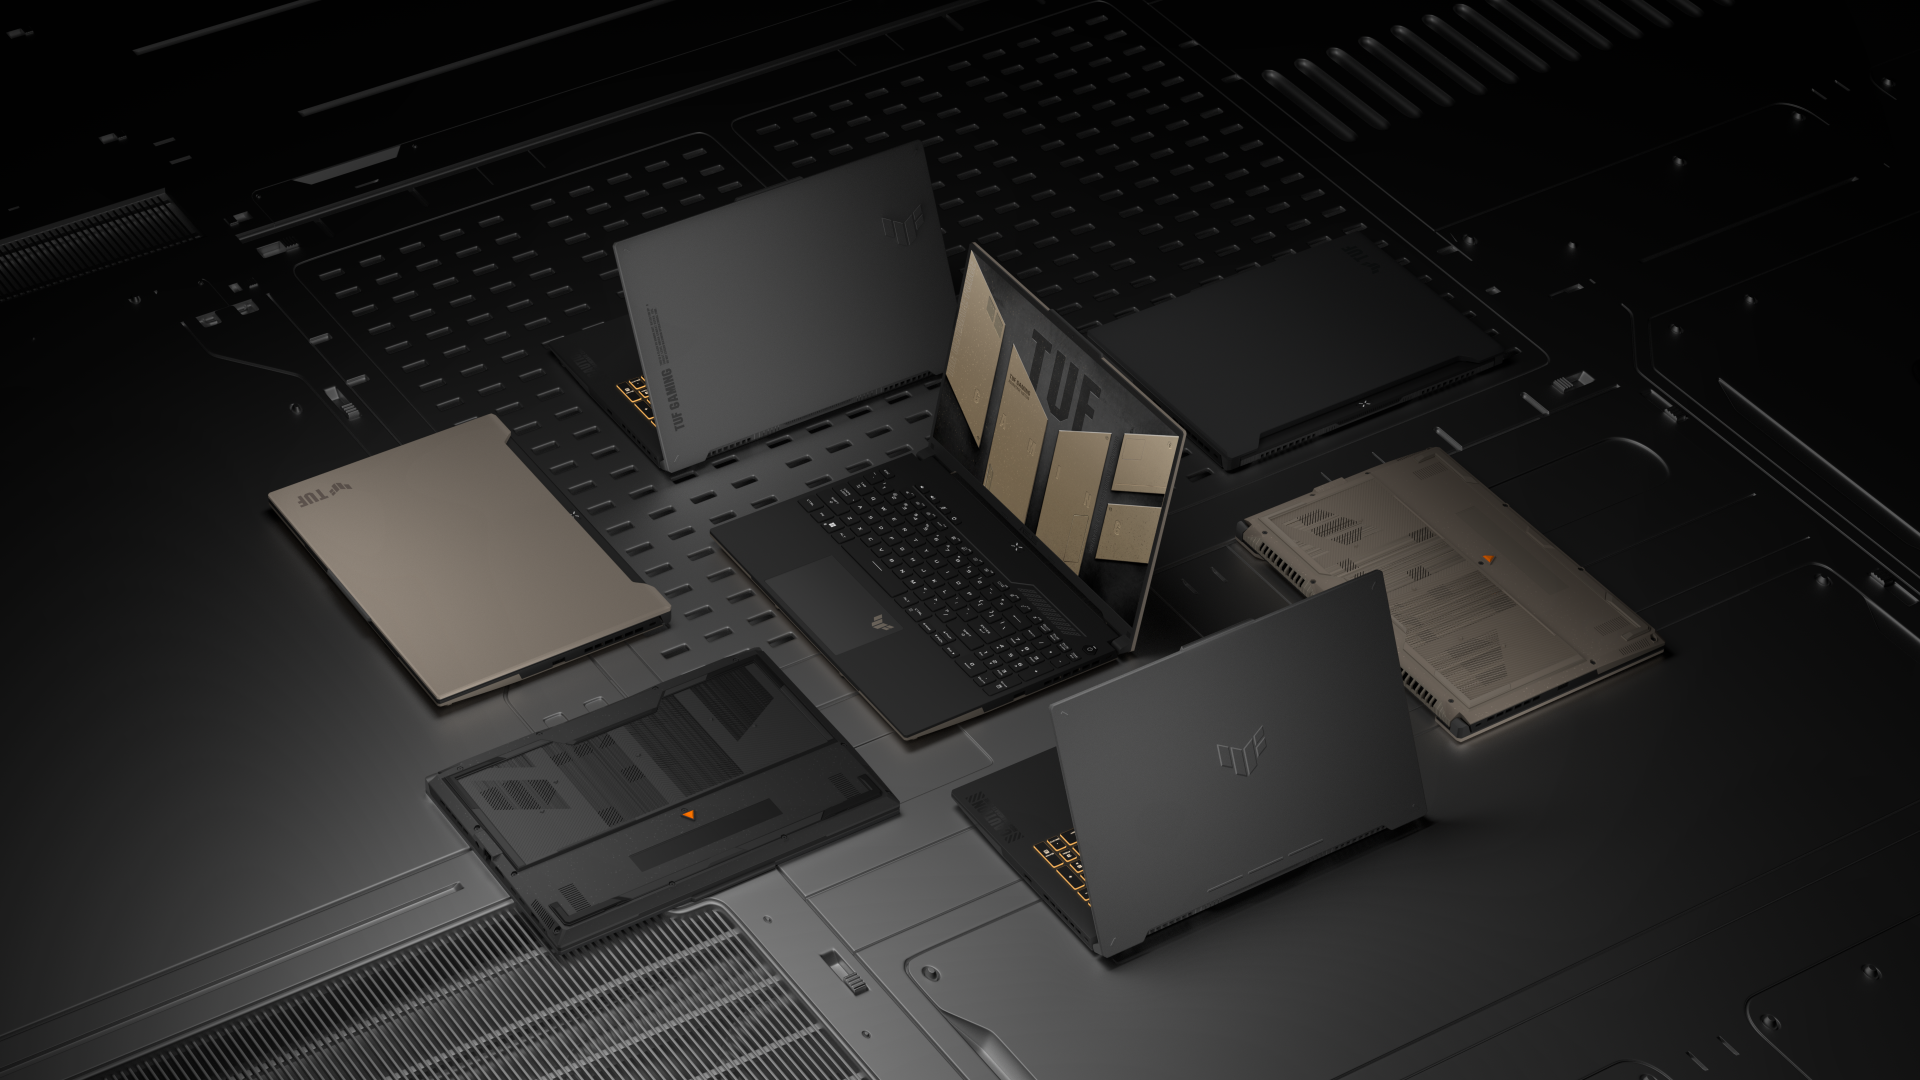 Opera and ASUS partner to create special ASUS ROG edition of Opera